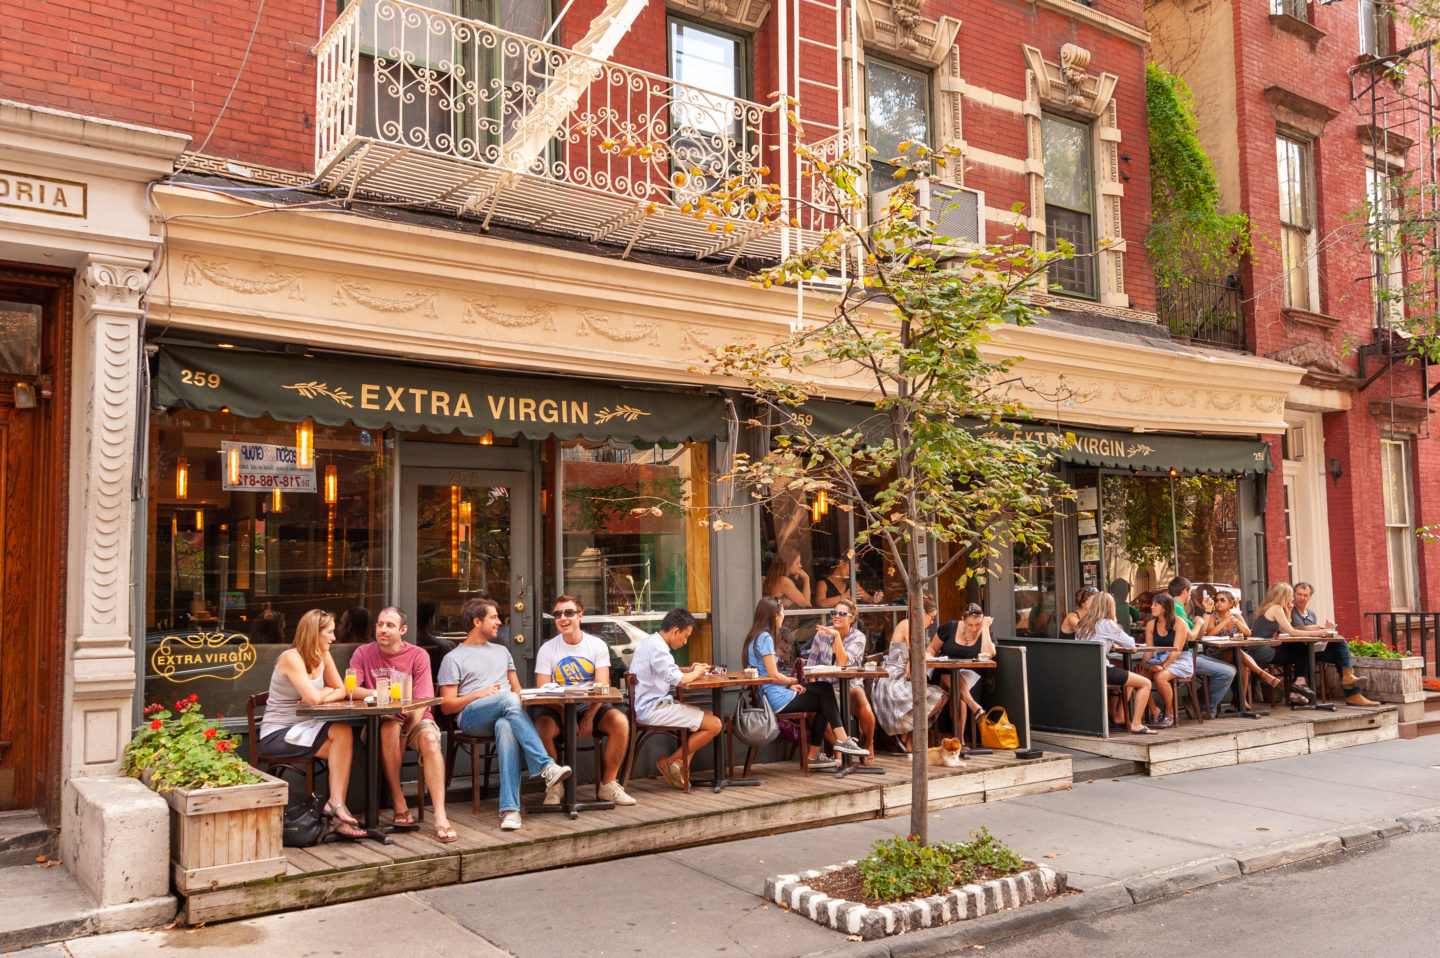 Al fresco dining in downtown of New York streets